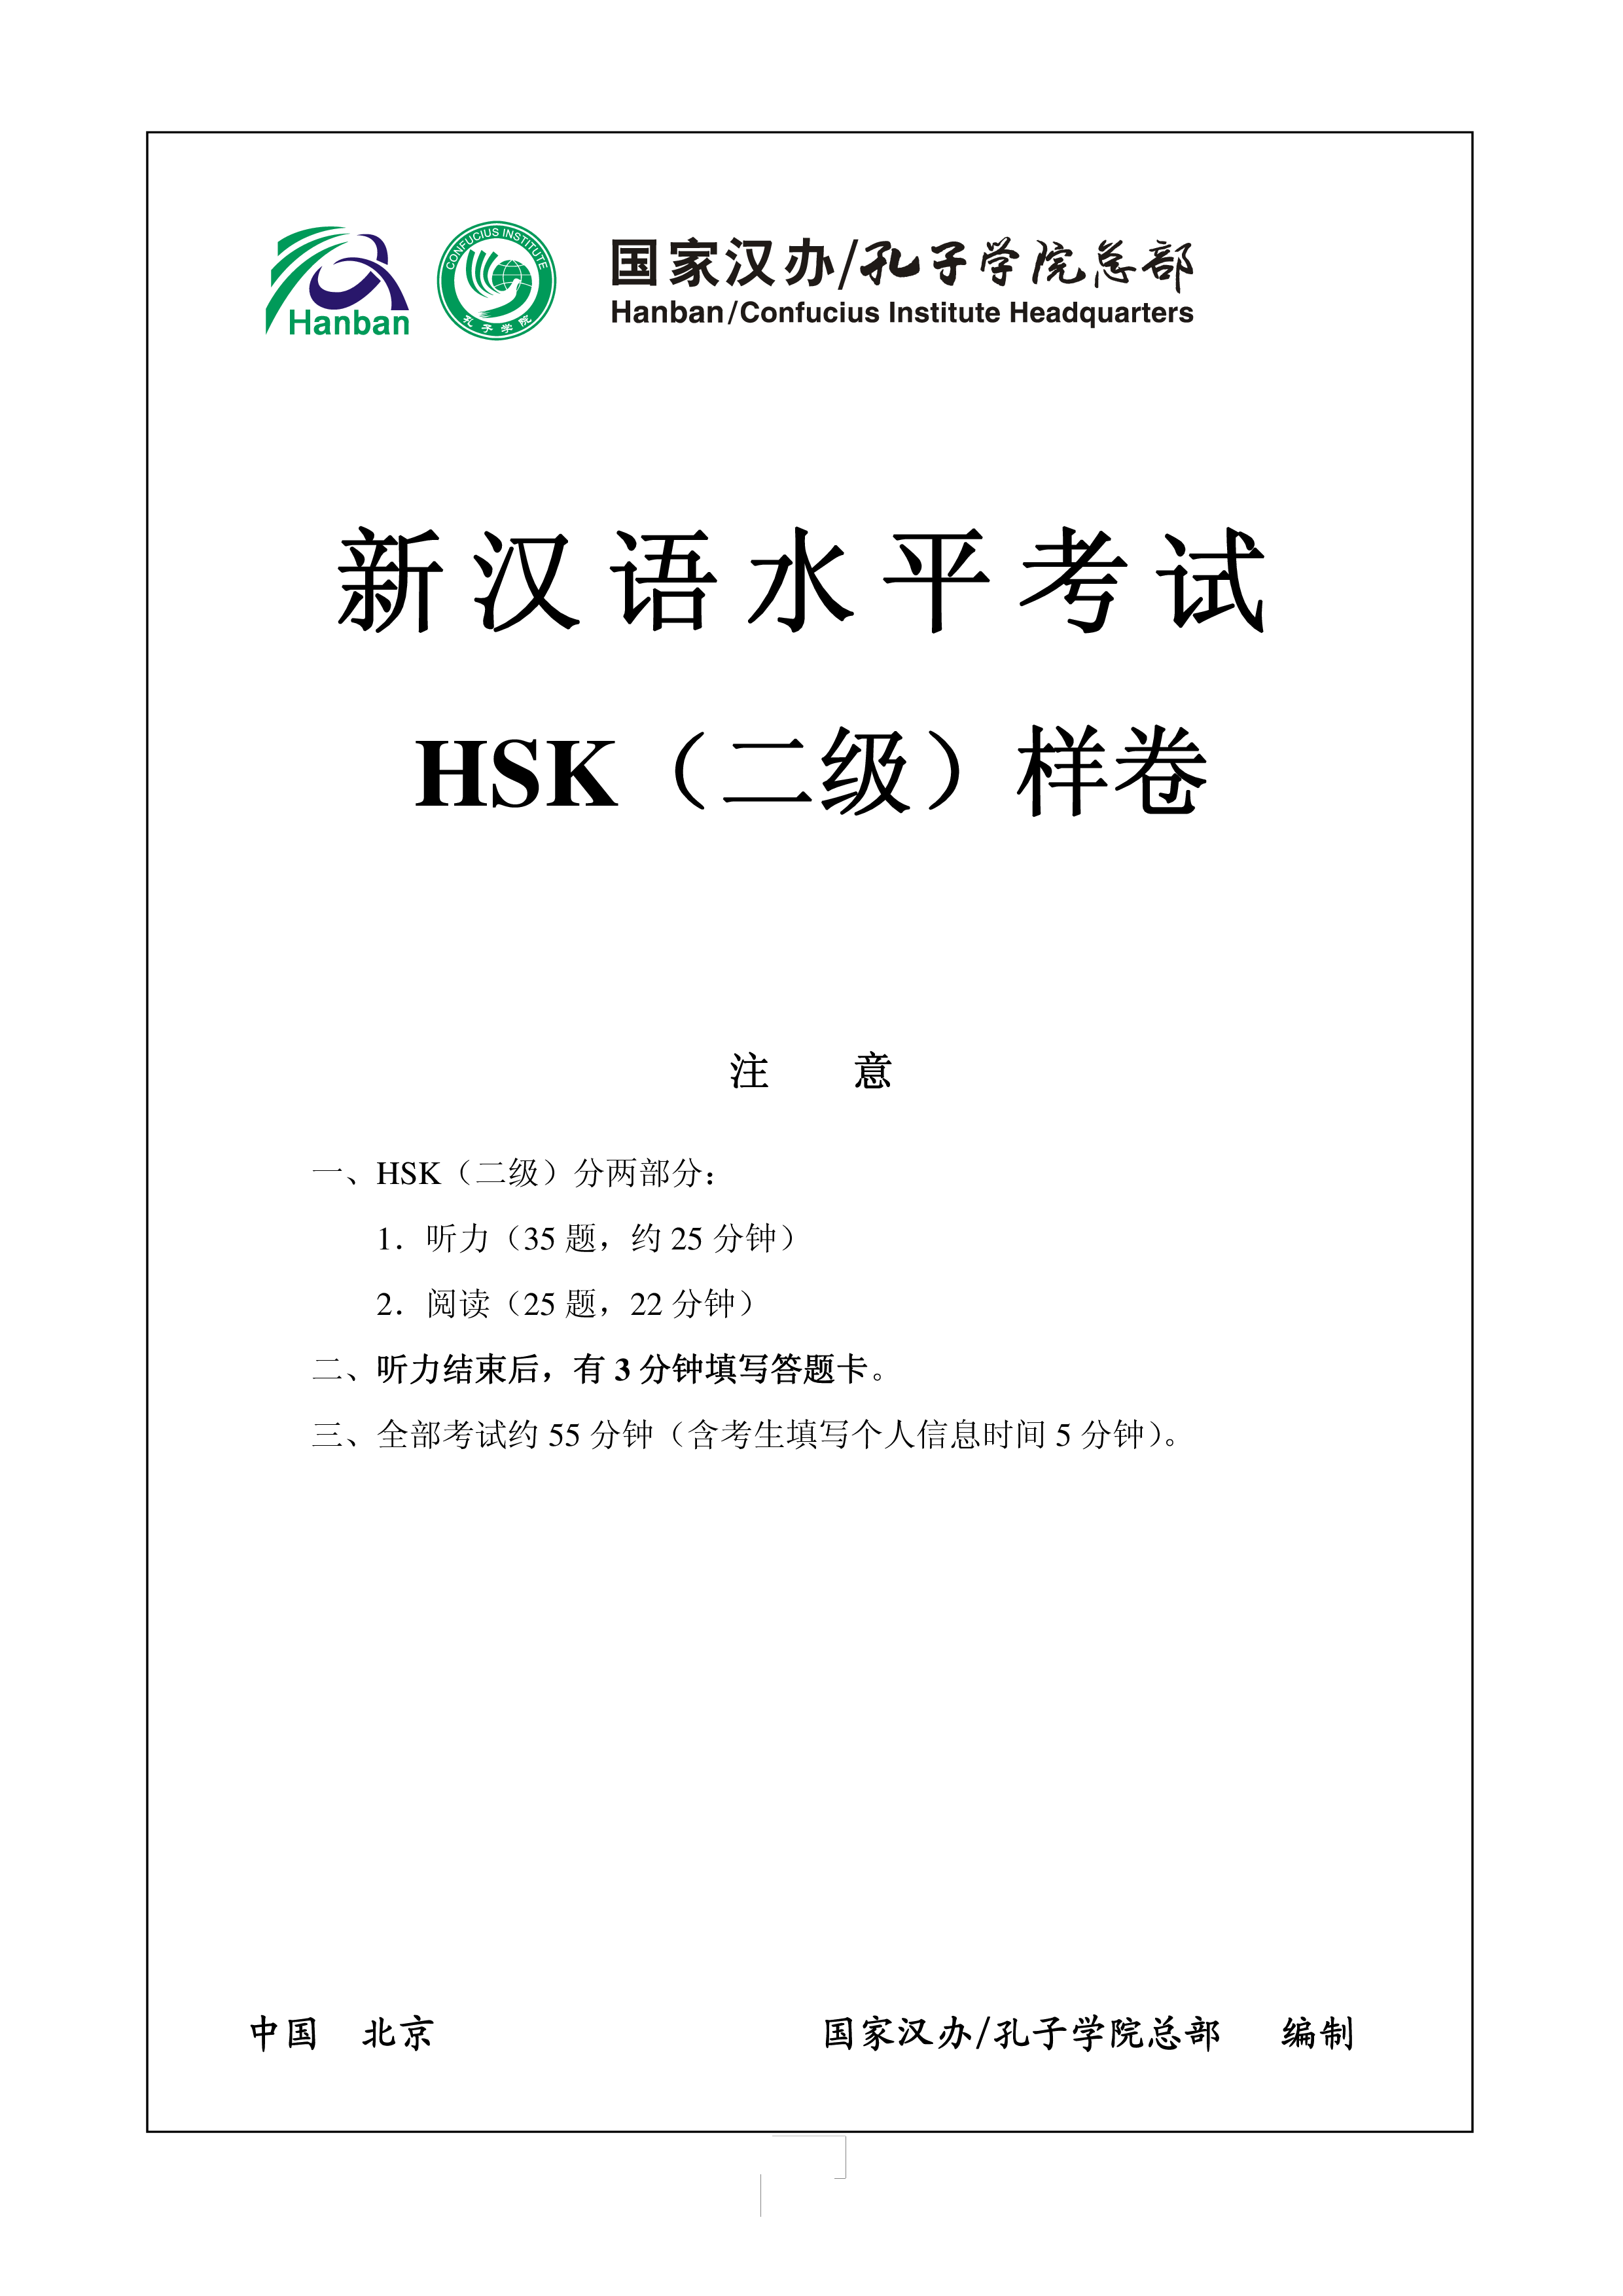 hsk2 chinese exam including answers # hsk2 2-1 template